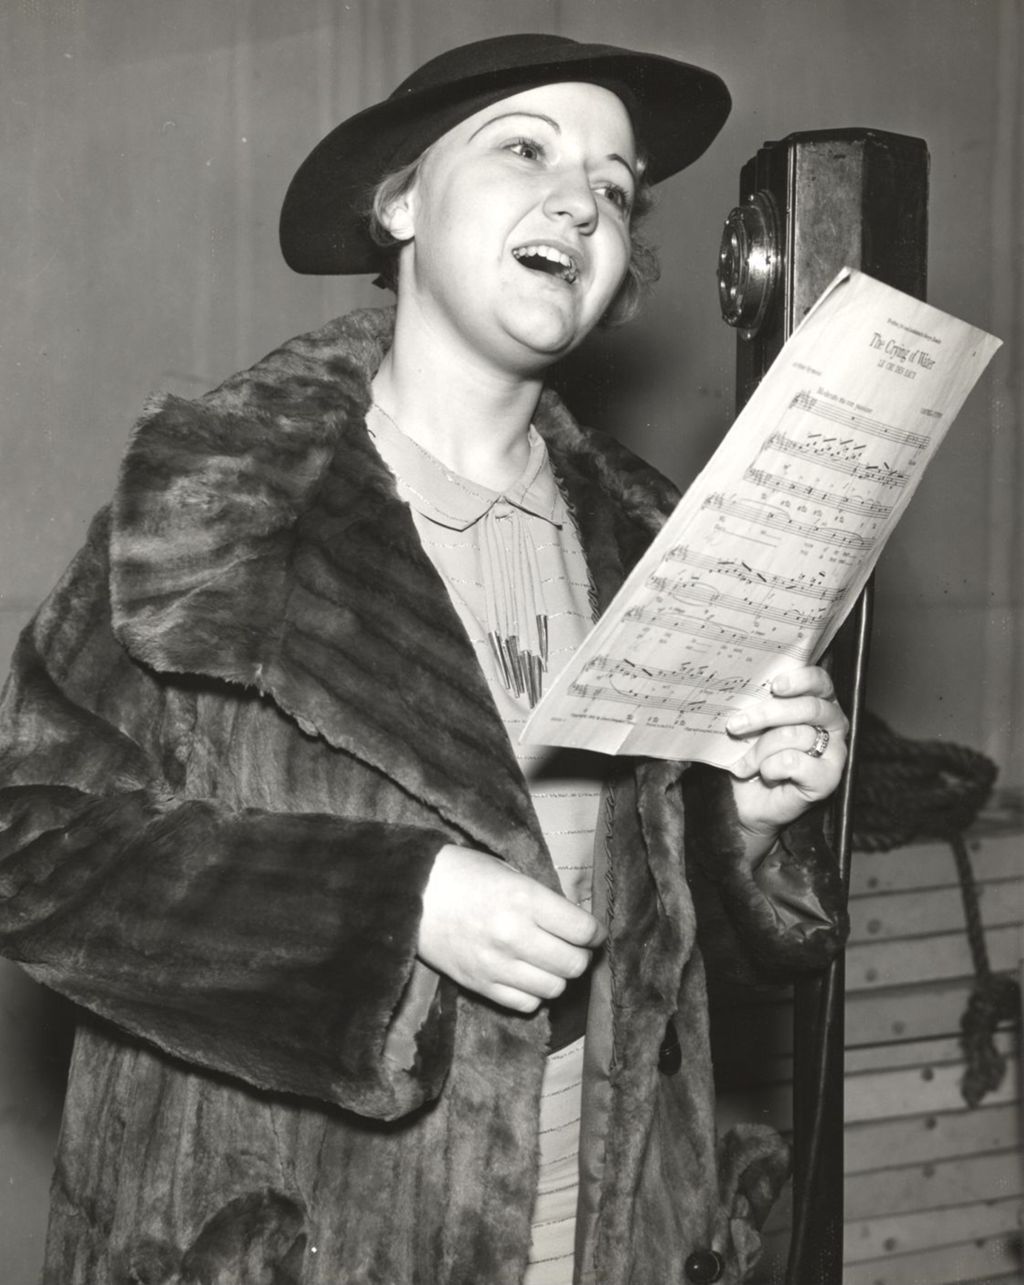 Miniature of Zeta Newell, of Oak Park, IL., a winner of the Century of Progress Opera Contest, sings in front of the microphone